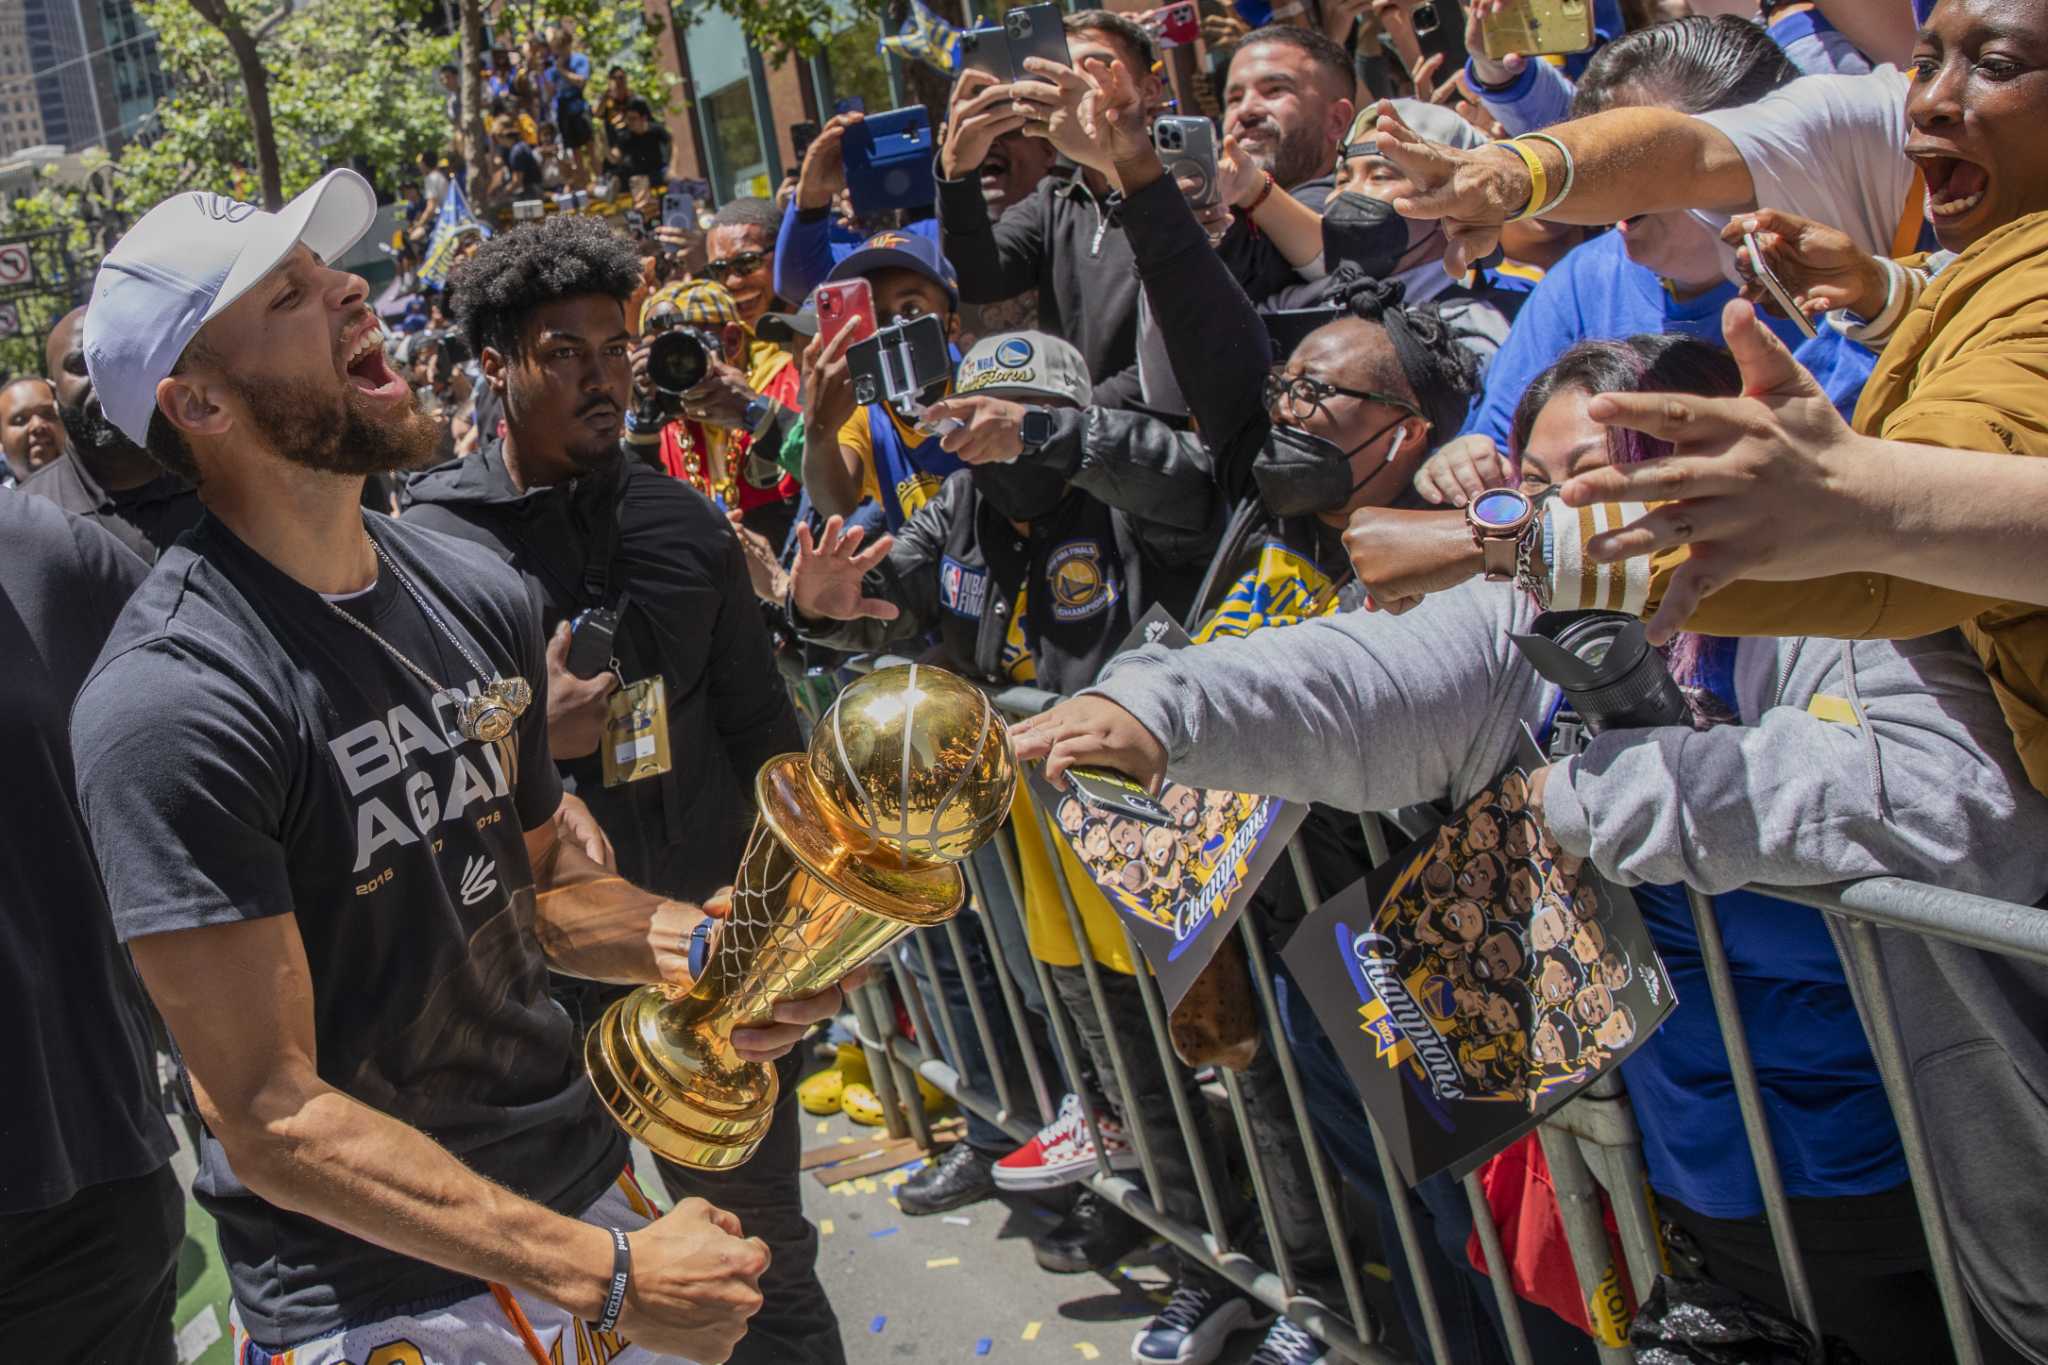 Report: NBA championship parade cost Warriors owners roughly $4